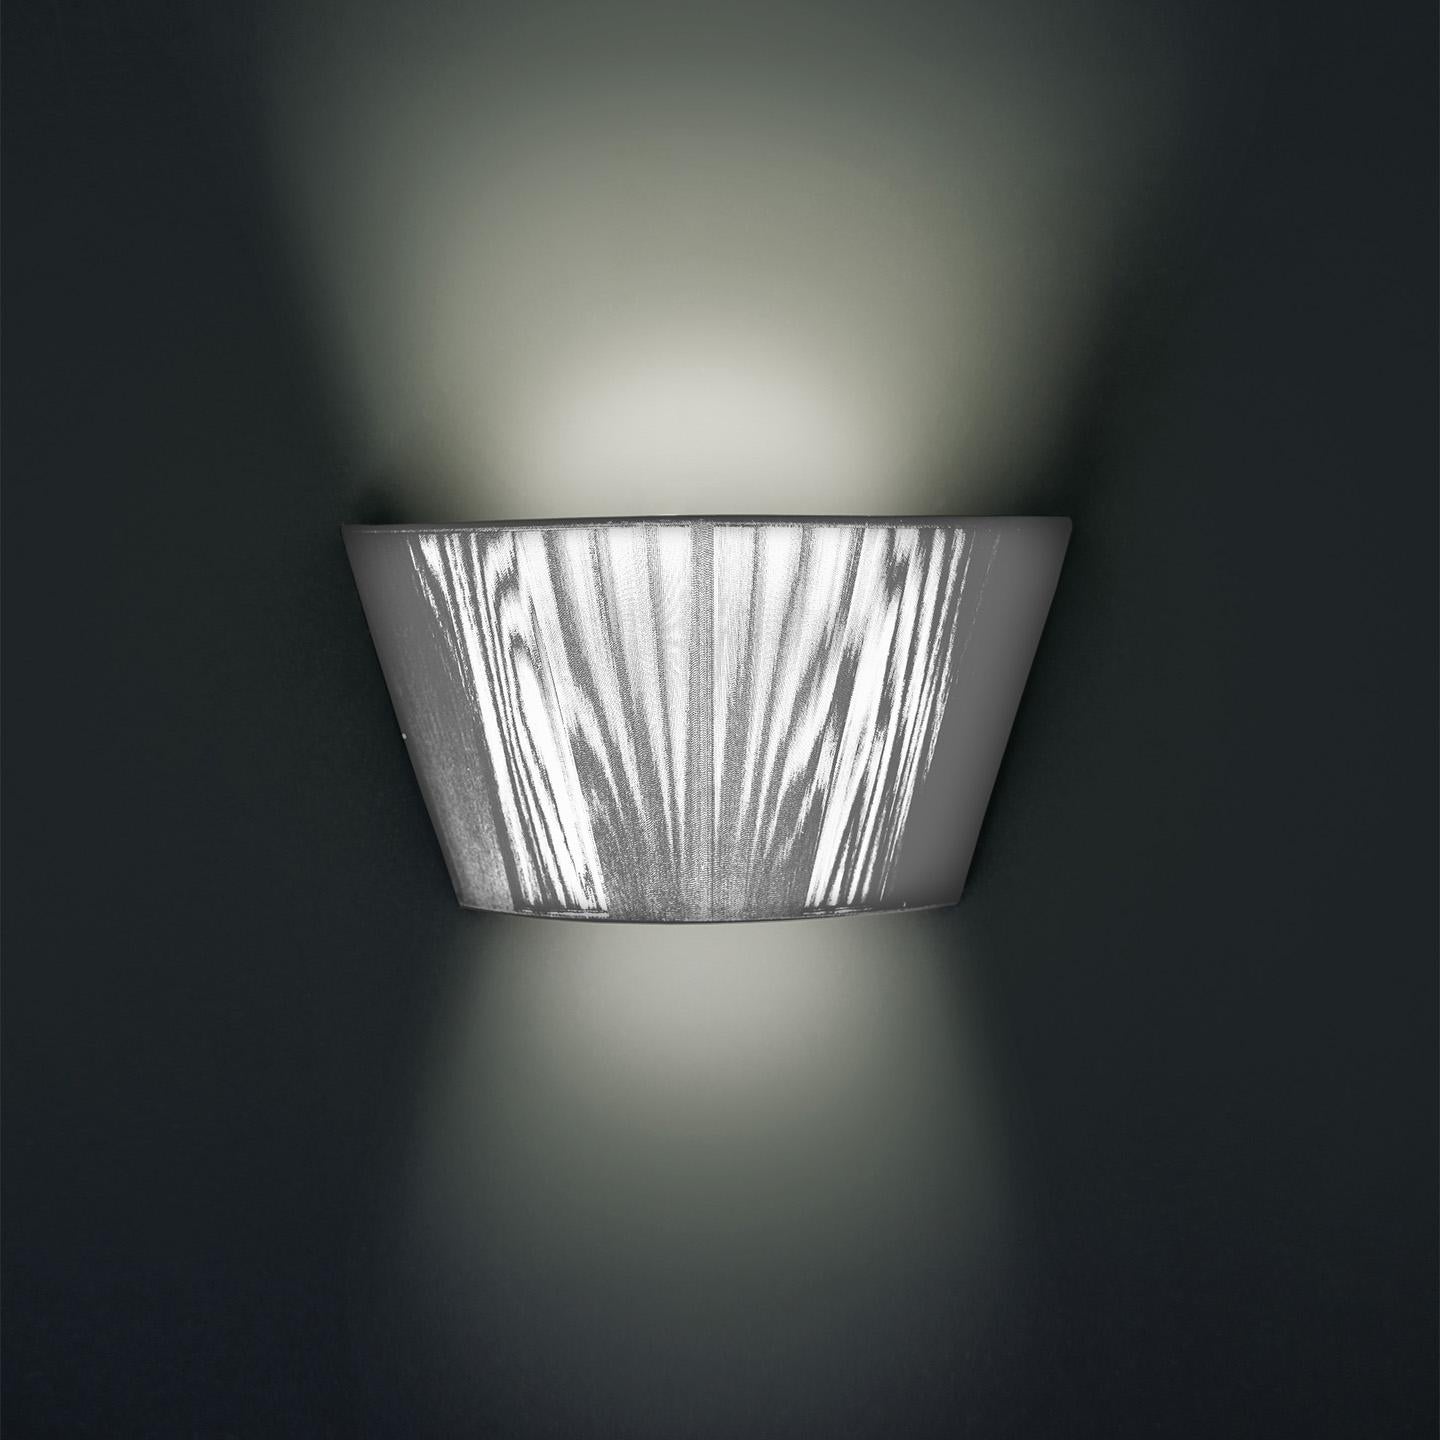 The Lilith wall lamp is an elegant lighting solution with a stunning light effect created by threading thin string in a consistent pattern across the shade. As you engage it from different viewpoints, the light pattern shimmers and changes. The